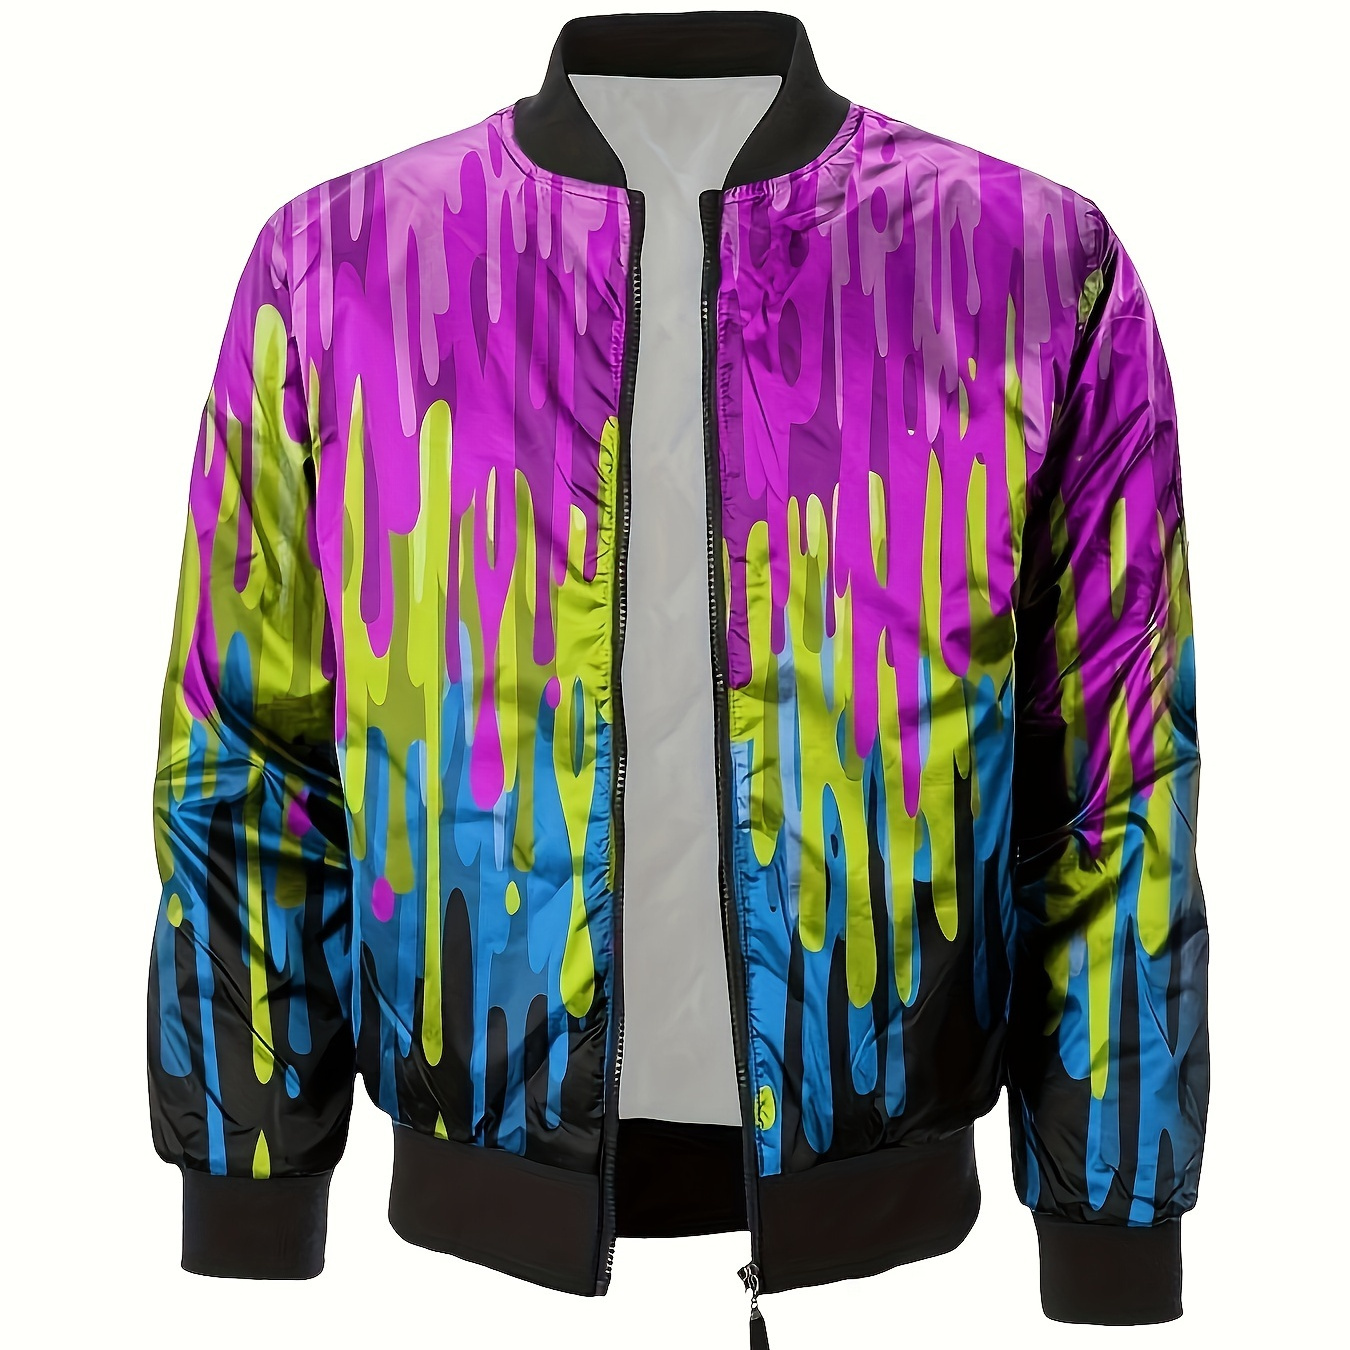 

Men's Colorful Paint Mark Pattern Long Sleeve And Zipper Down Sports Jacket With Stand Collar And Pockets, Stylish And Trendy Jacket For Leisurewear And Sports Wear